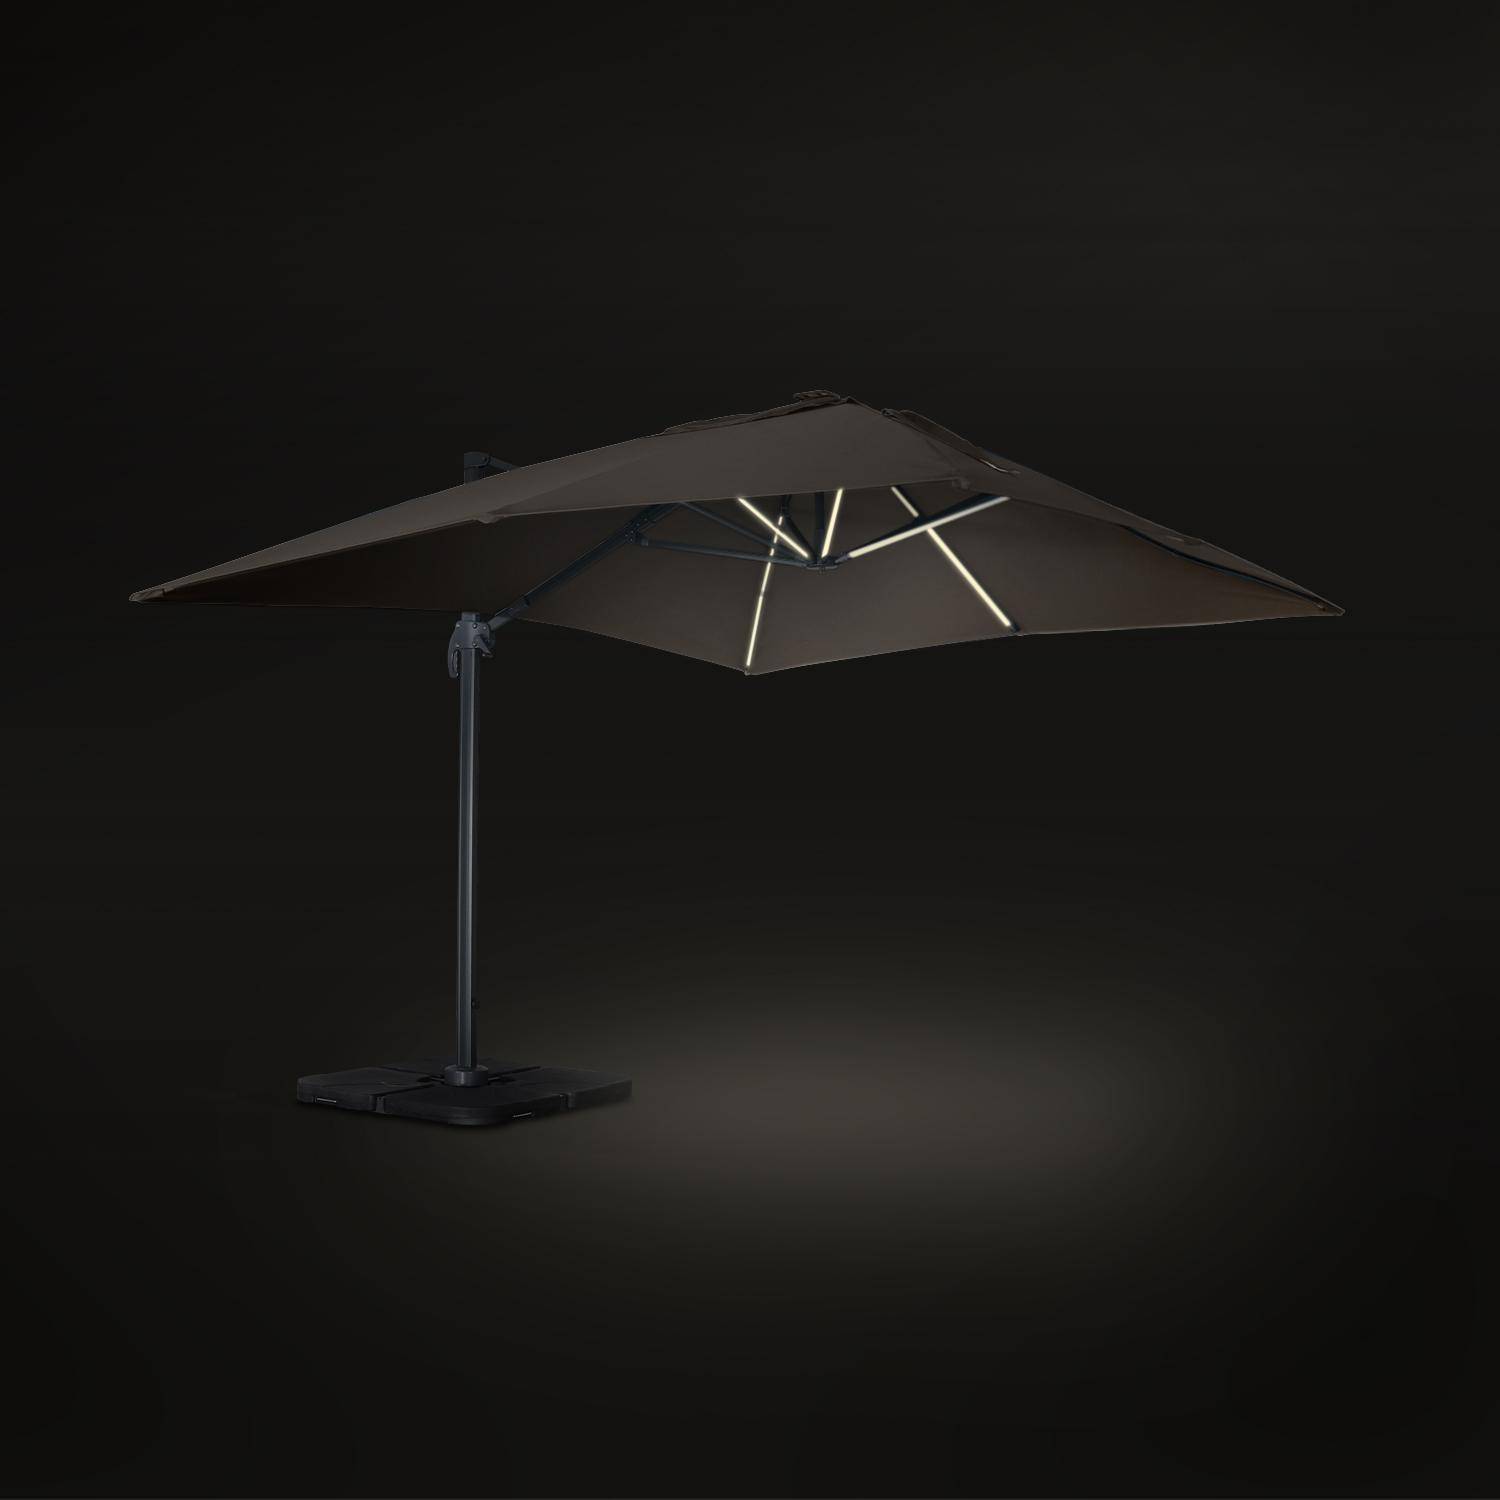 Premium rectangular 3x4m cantilever parasol with solar-powered integrated LED lights - Cantilever parasol, tiltable, foldable with 360° rotation, solar charging, cover included - Luce - Beige-brown,sweeek,Photo4